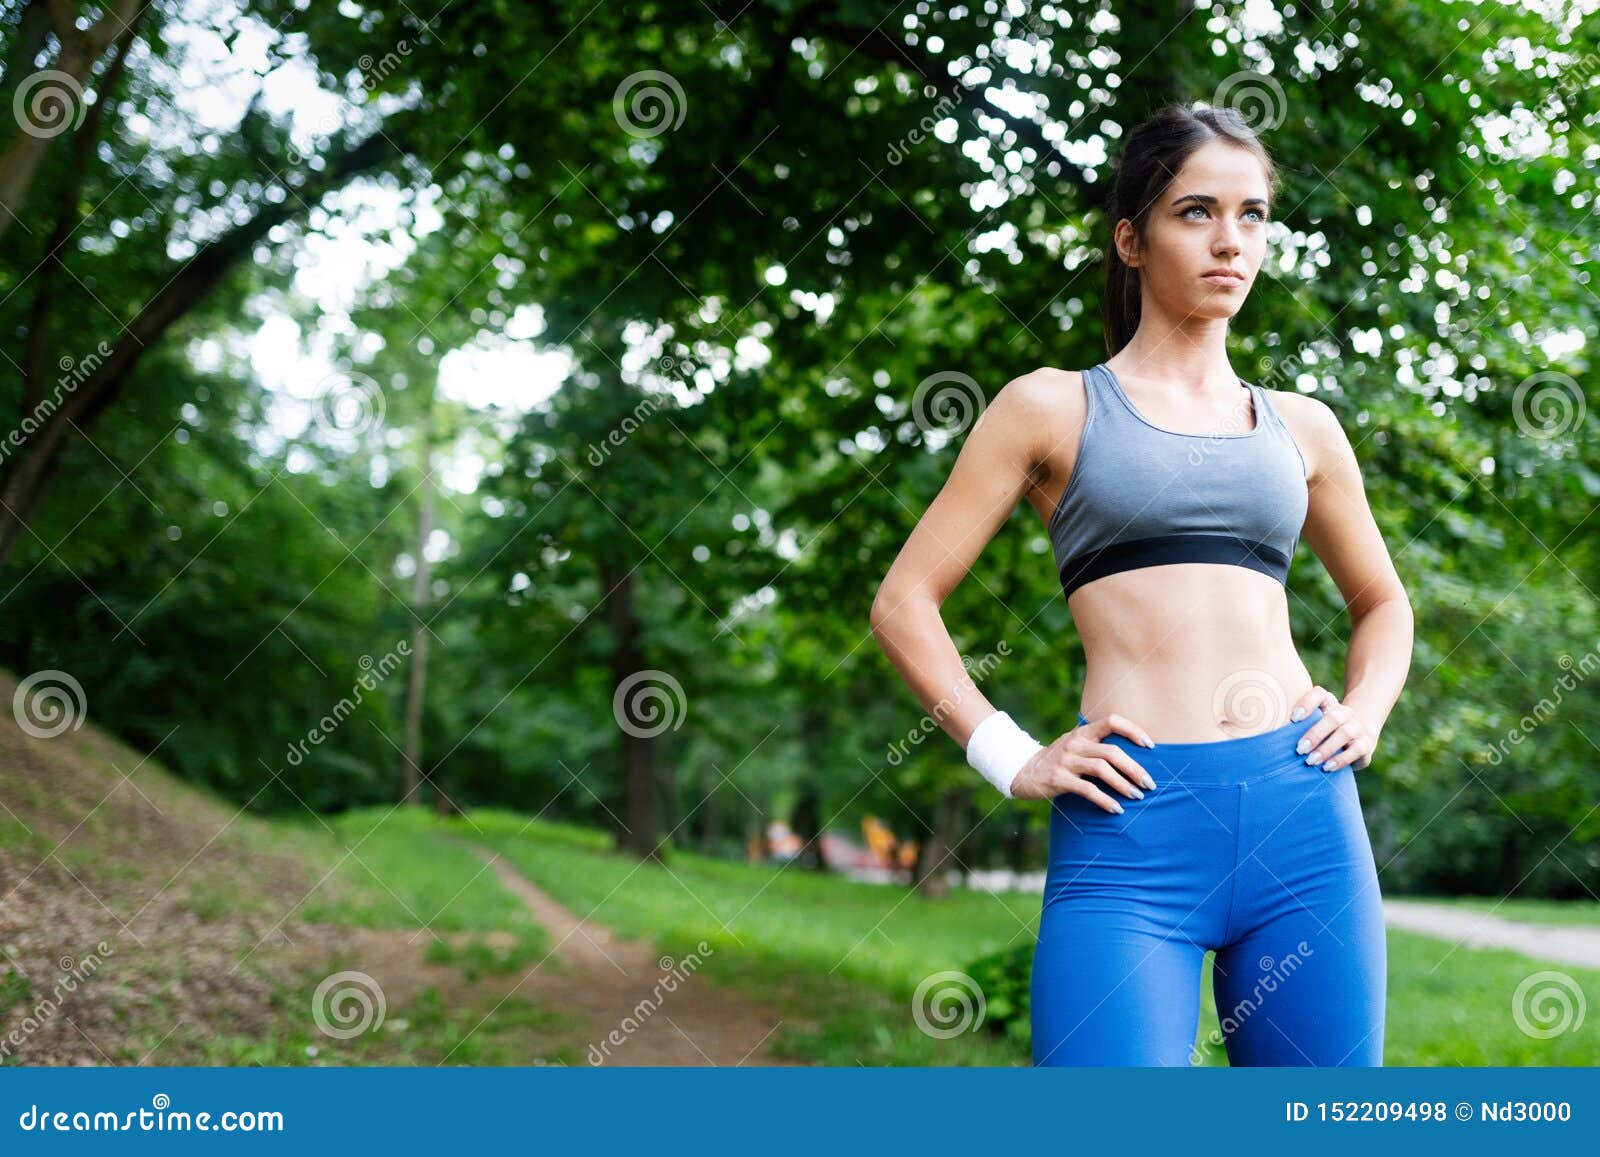 Healthy Lifestyle Image of Young Woman Exercising Outside Stock Photo ...